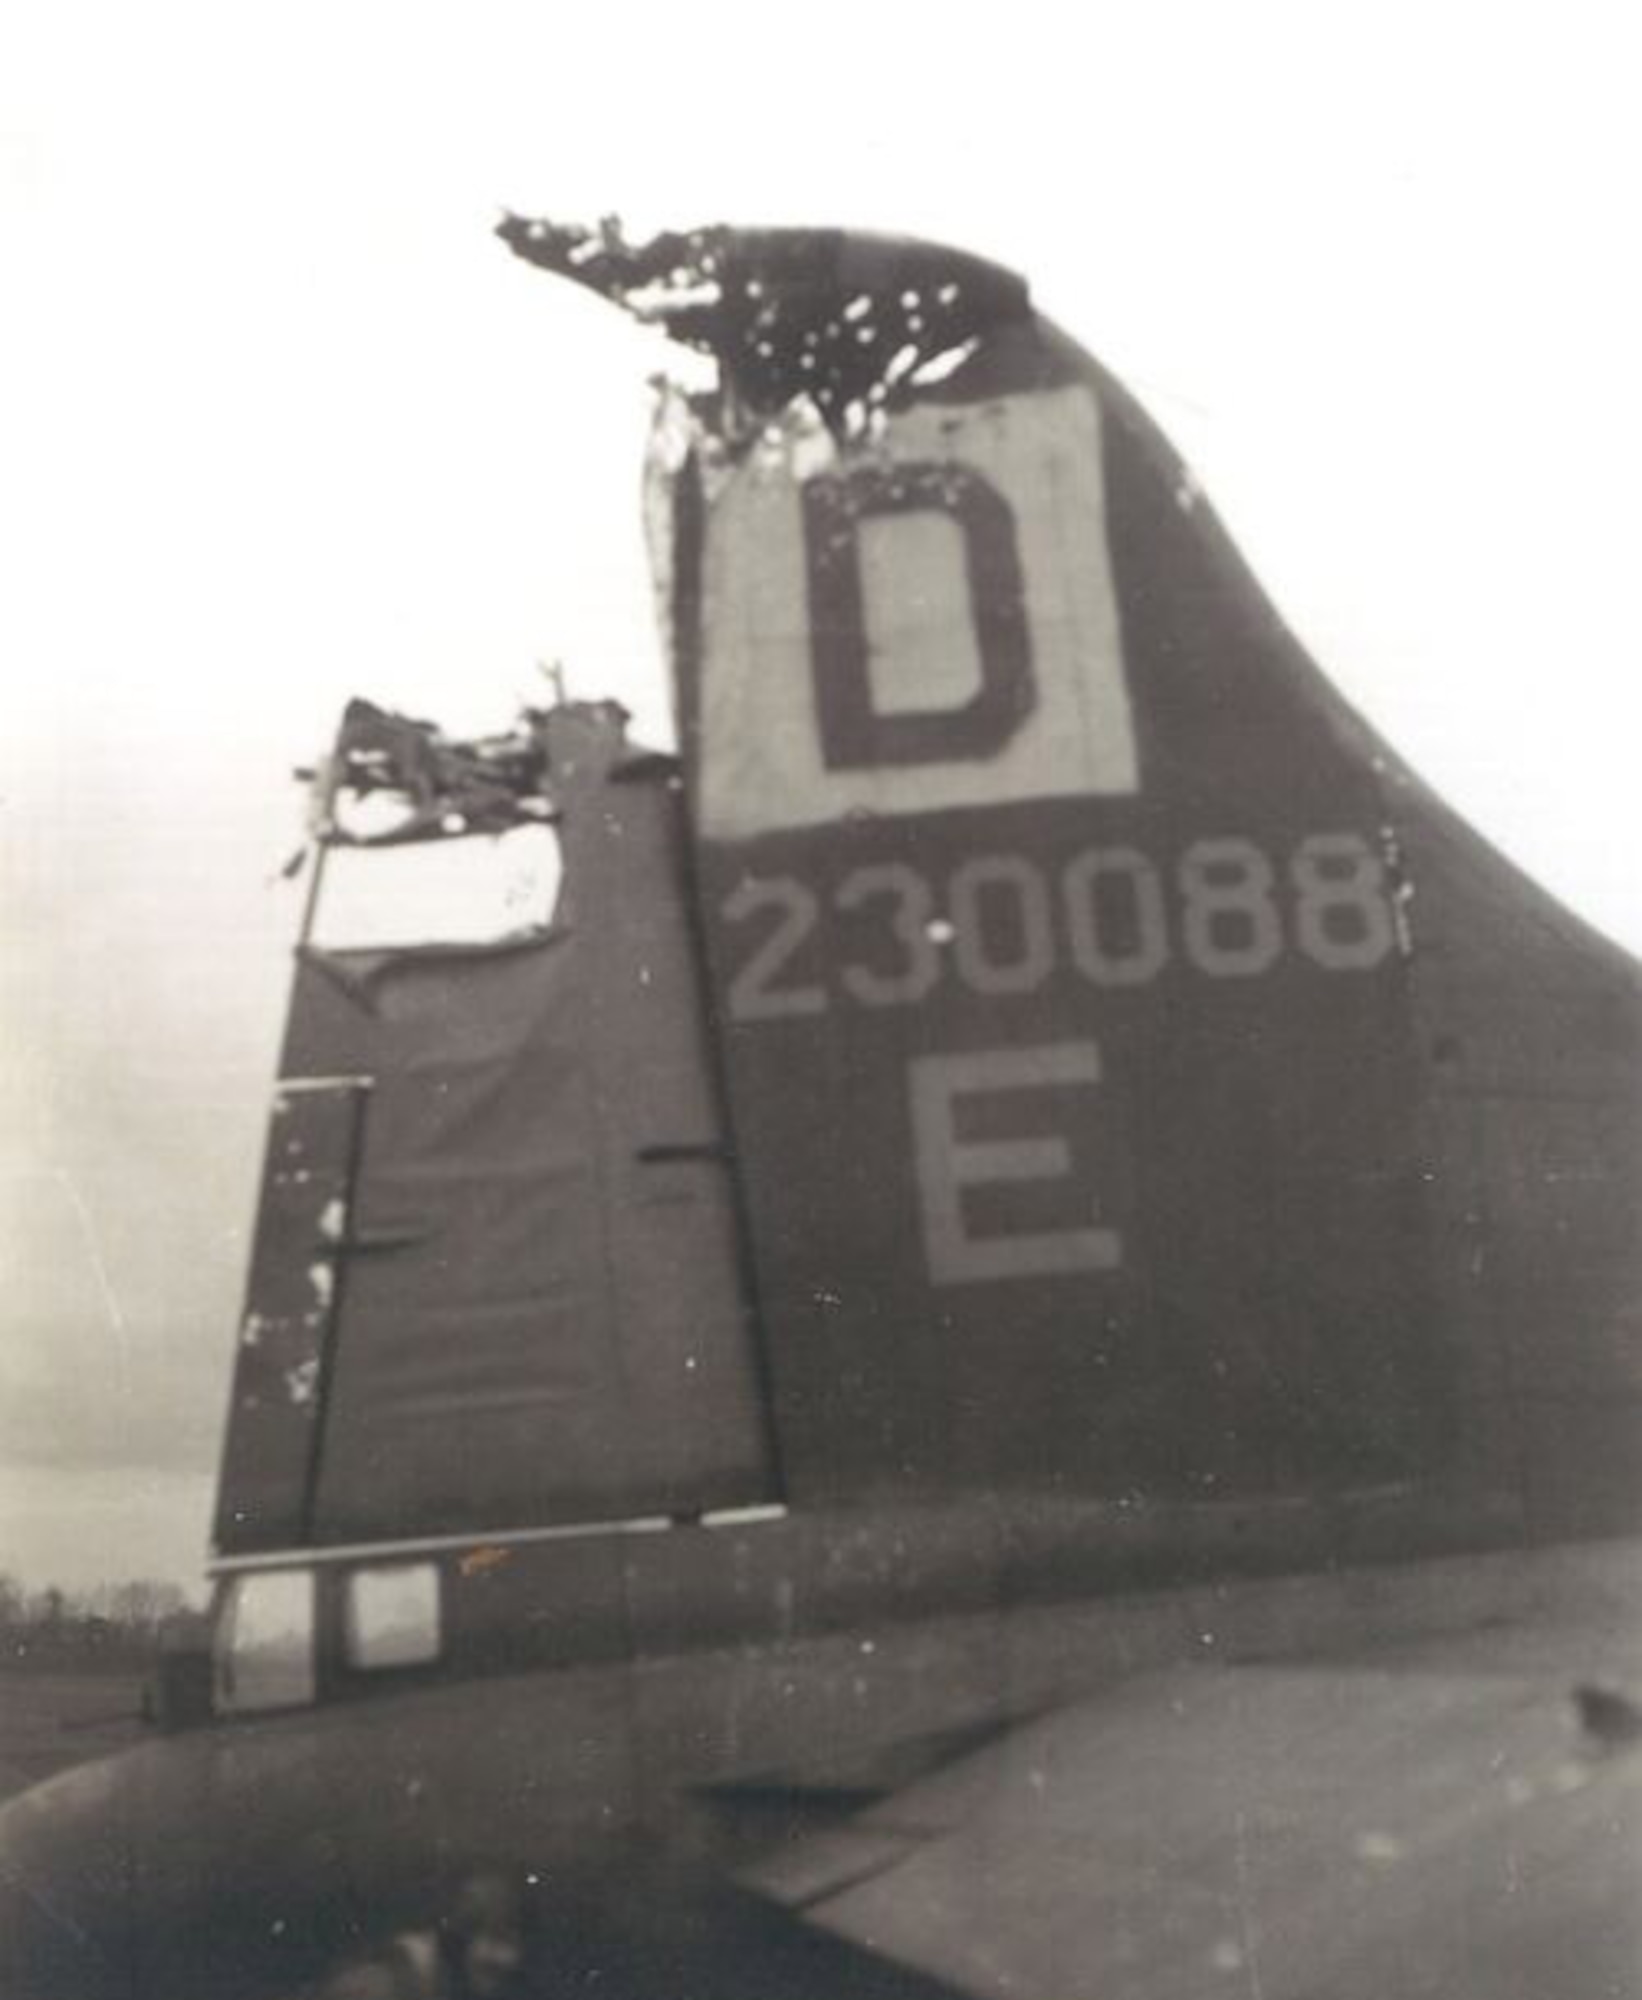 The original World War II B-17 Flying Fortress, “Squawkin Hawk” sports flak damage after a combat mission in 1943. The 100th Air Refueling Wing unveiled new heritage nose art on two of its KC-135 Stratotankers – one of which is “Squawkin Hawk” – during a nose art dedication ceremony at Royal Air Force Mildenhall, England, Oct. 10, 2023. The last nose art was added to the 100th ARW’s fleet of tankers in honor of those who served at Thorpe Abbotts during World War II, many of whom made the ultimate sacrifice. (U.S. Air Force photo by Karen Abeyasekere)